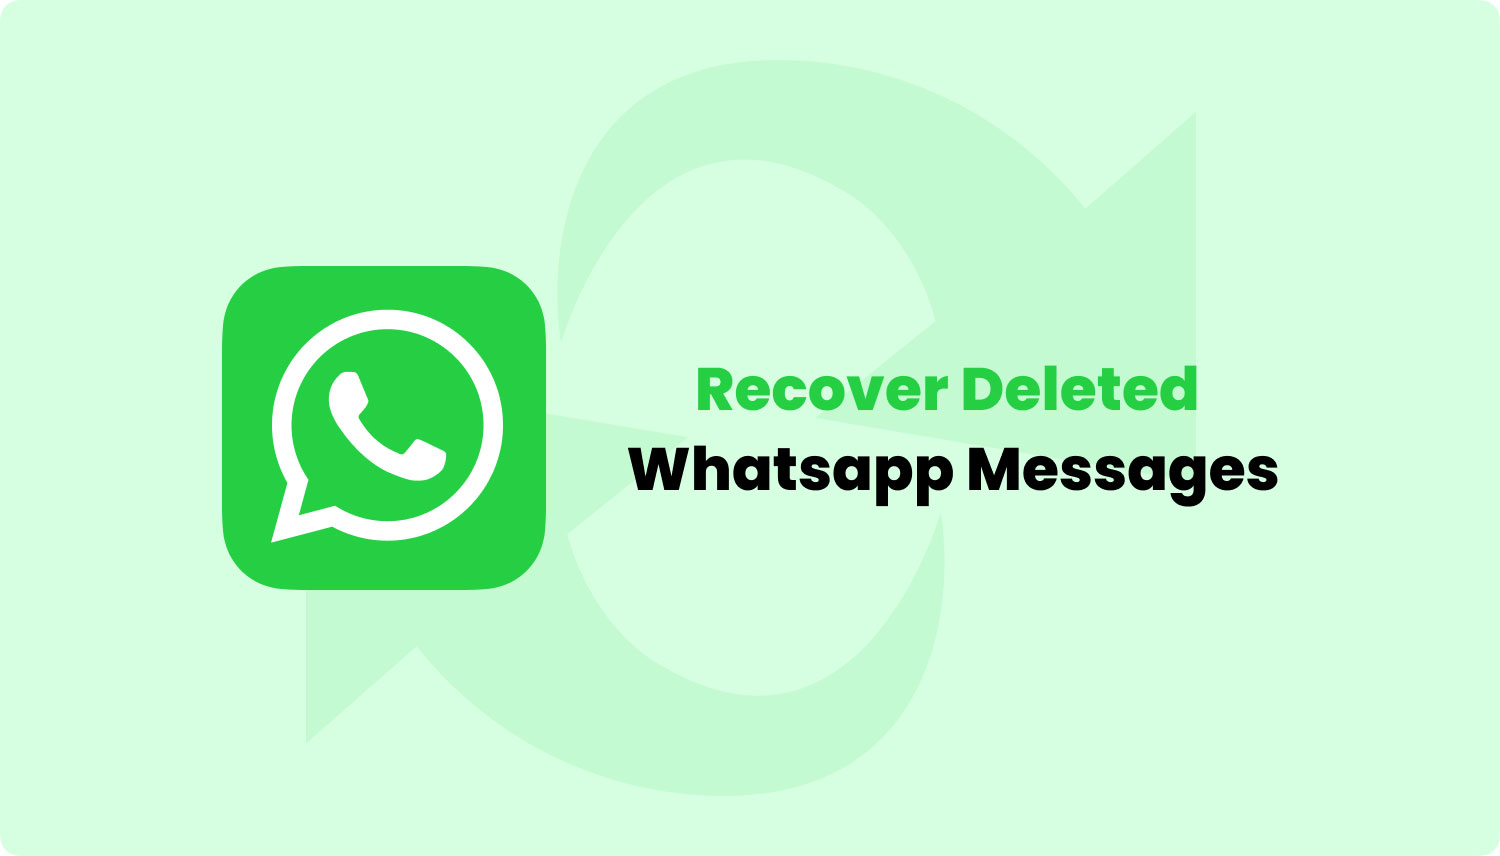 Reasons for WhatsApp Messages Loss